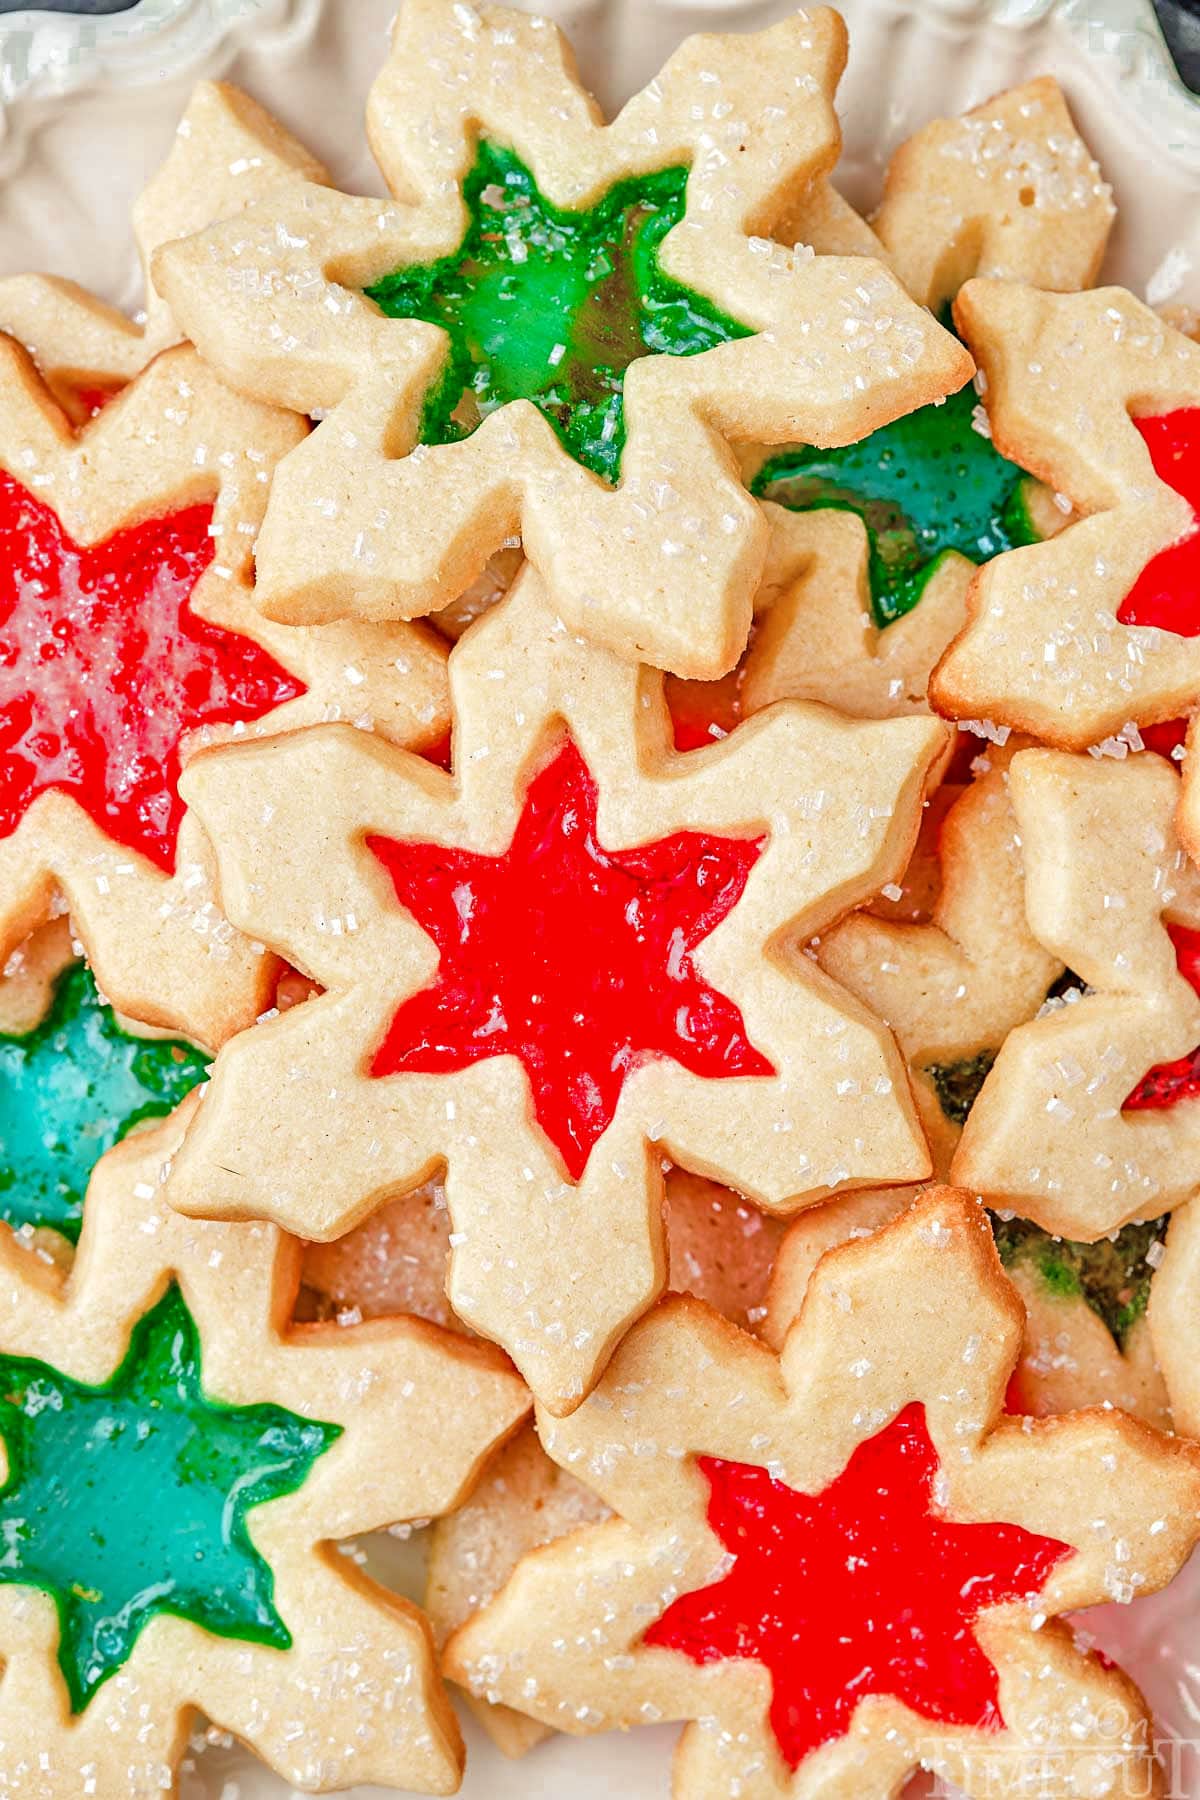 top down look at tray loaded with stained glass cookies with red and green centers cut into snowflake shapes.